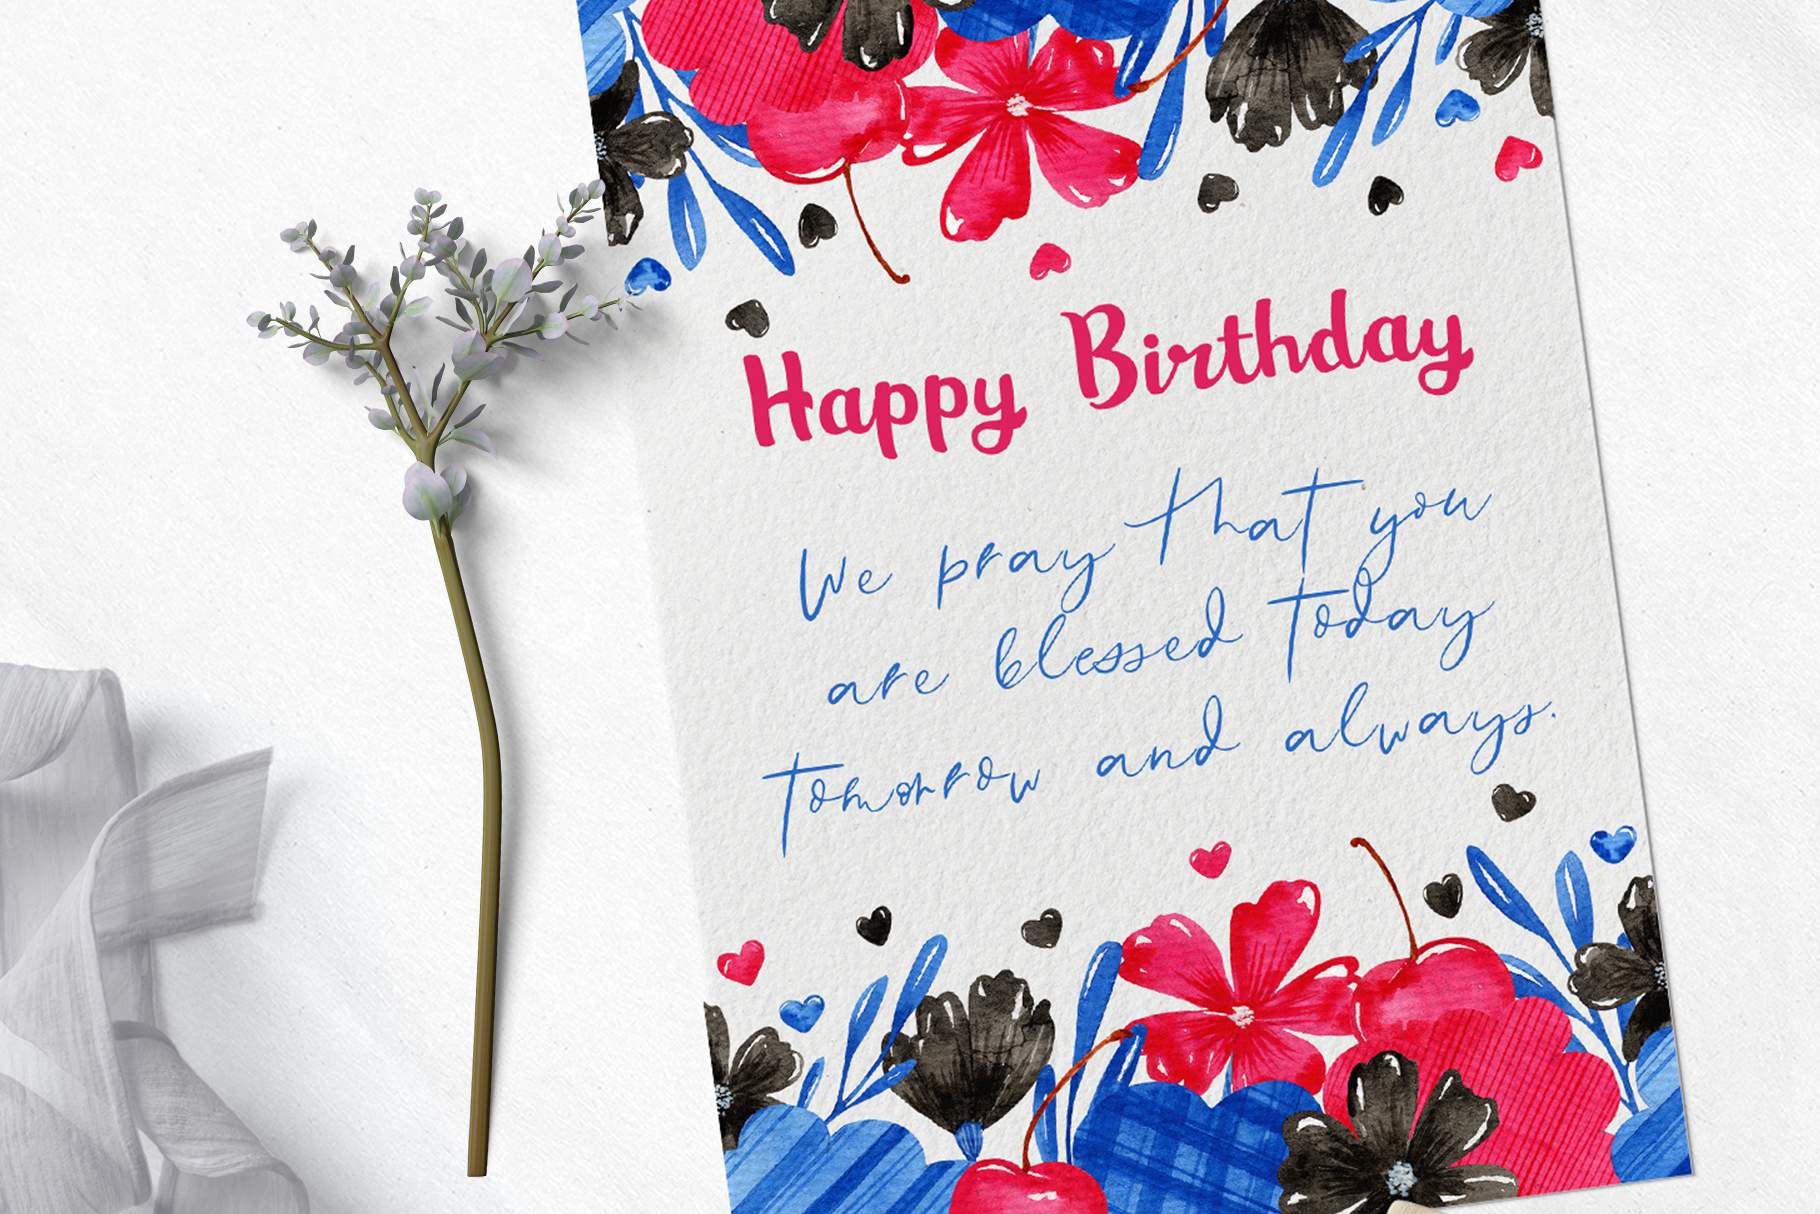 Happy birthday card with a flower on it.